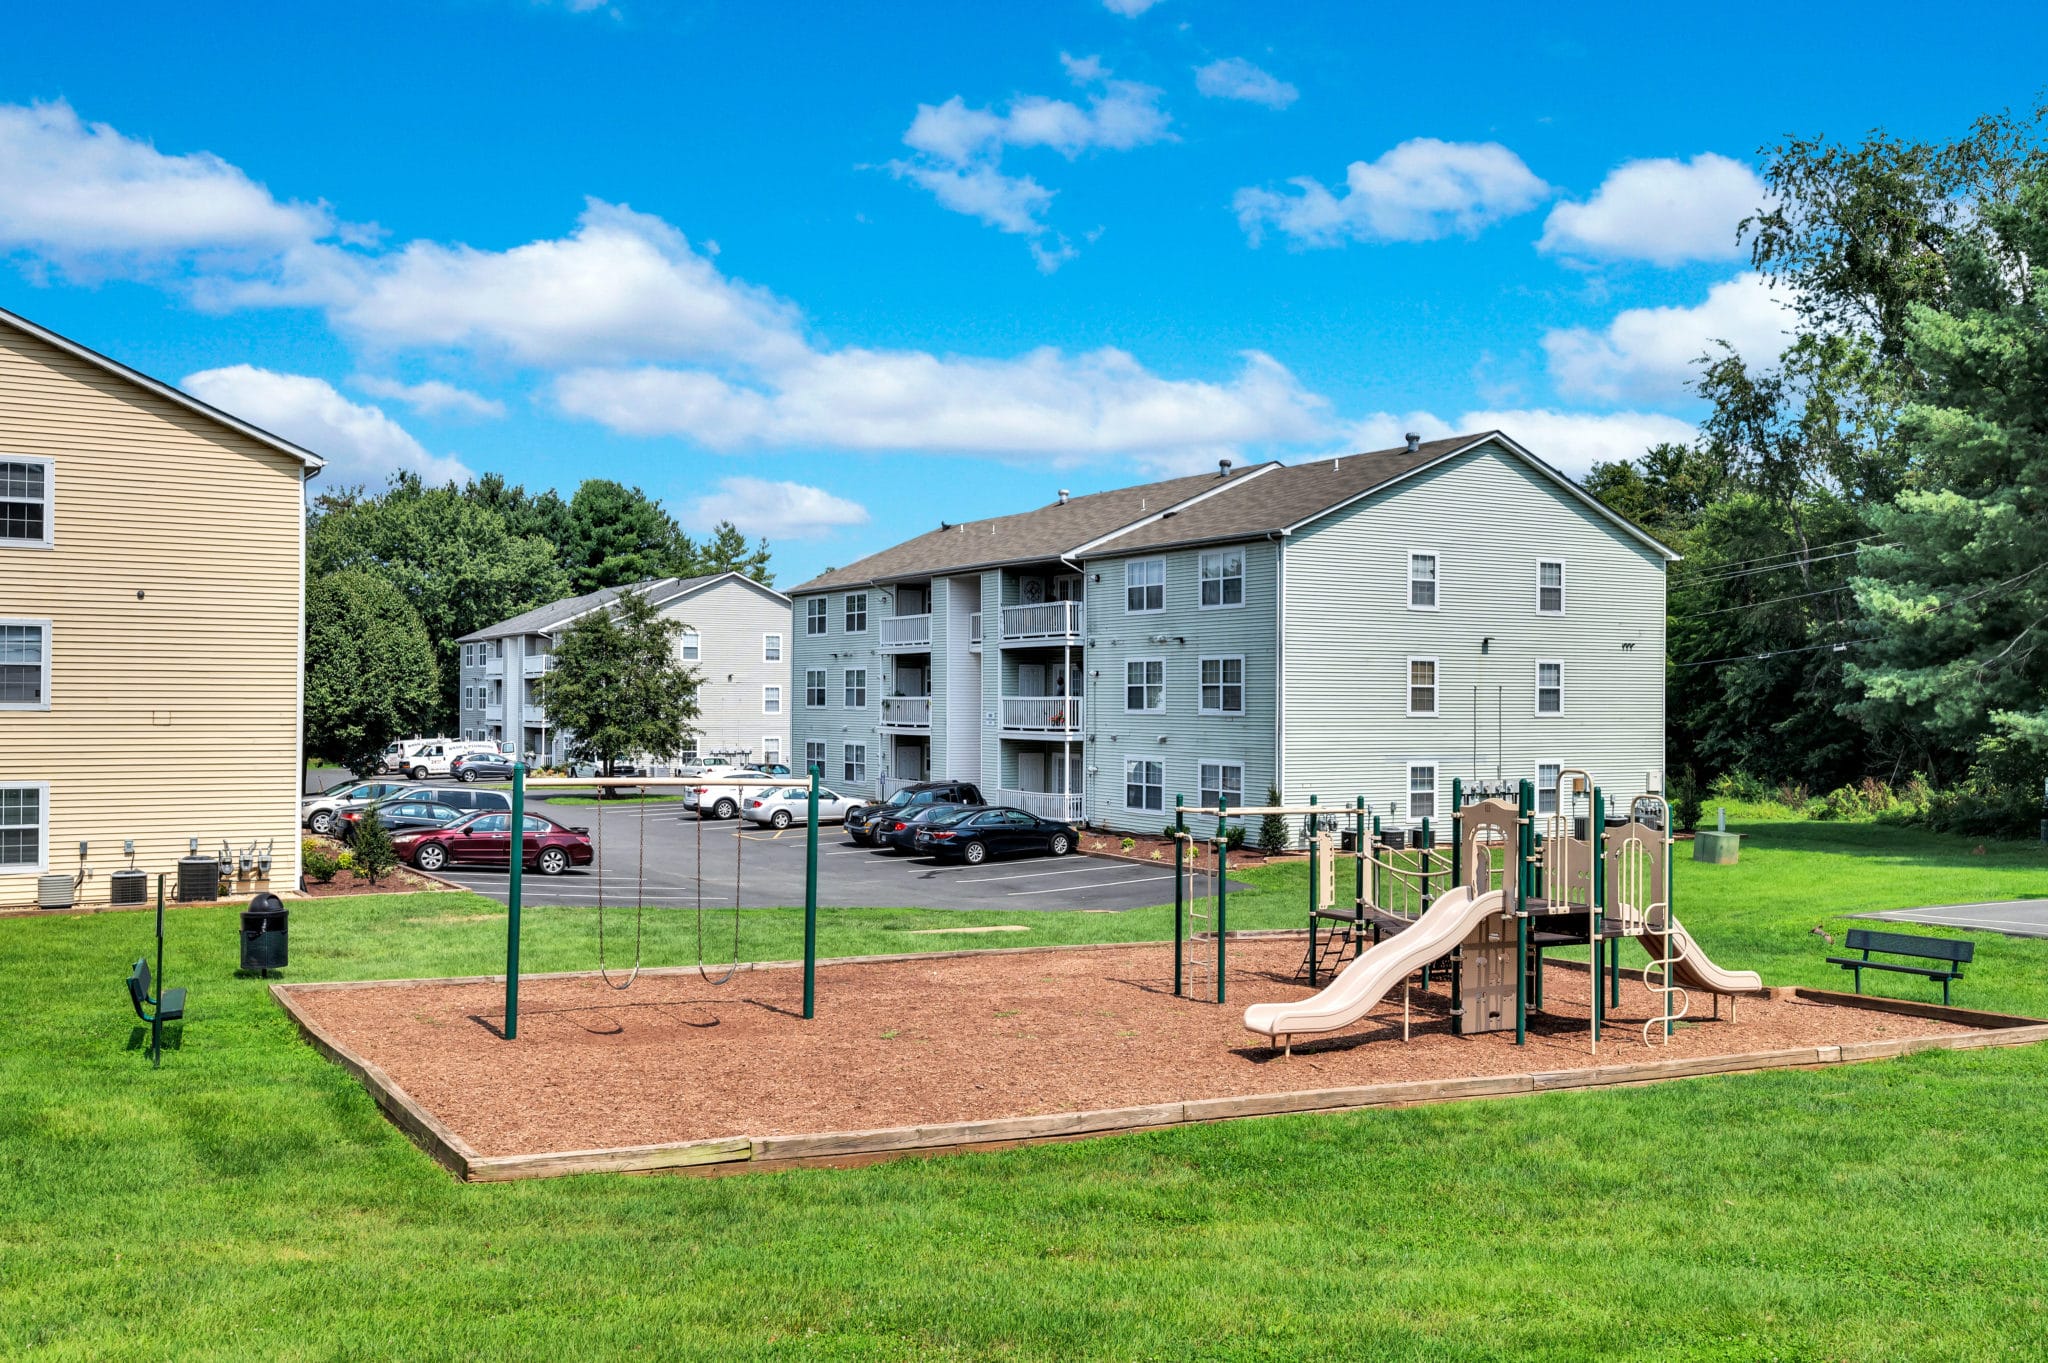 playground and parking lot | Spark Culpeper apartments